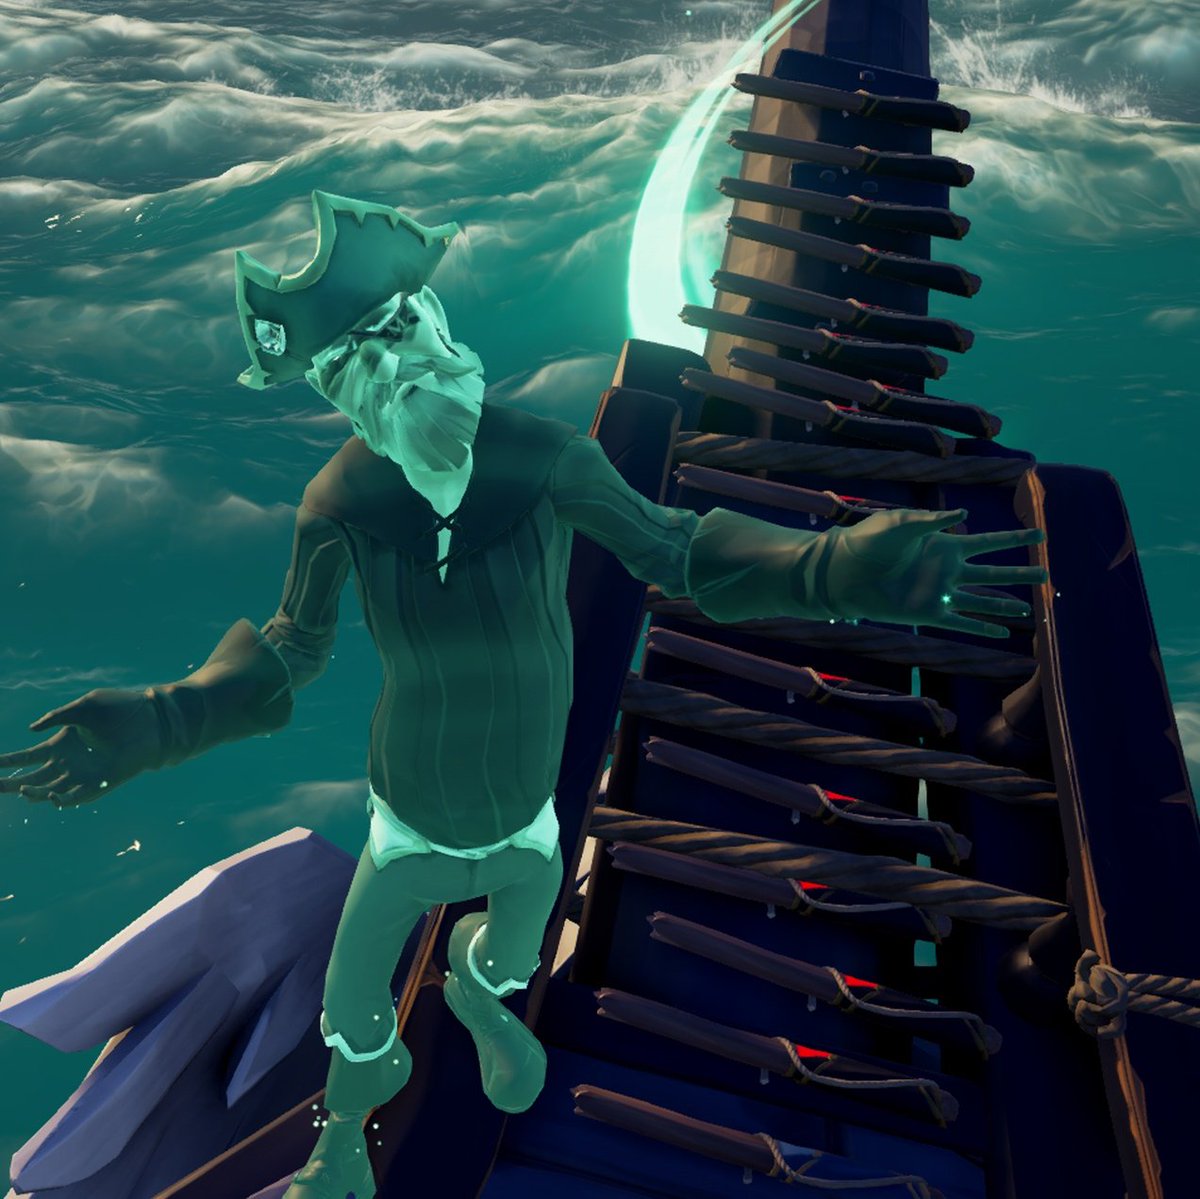 A Successful evening! @SeaOfThieves